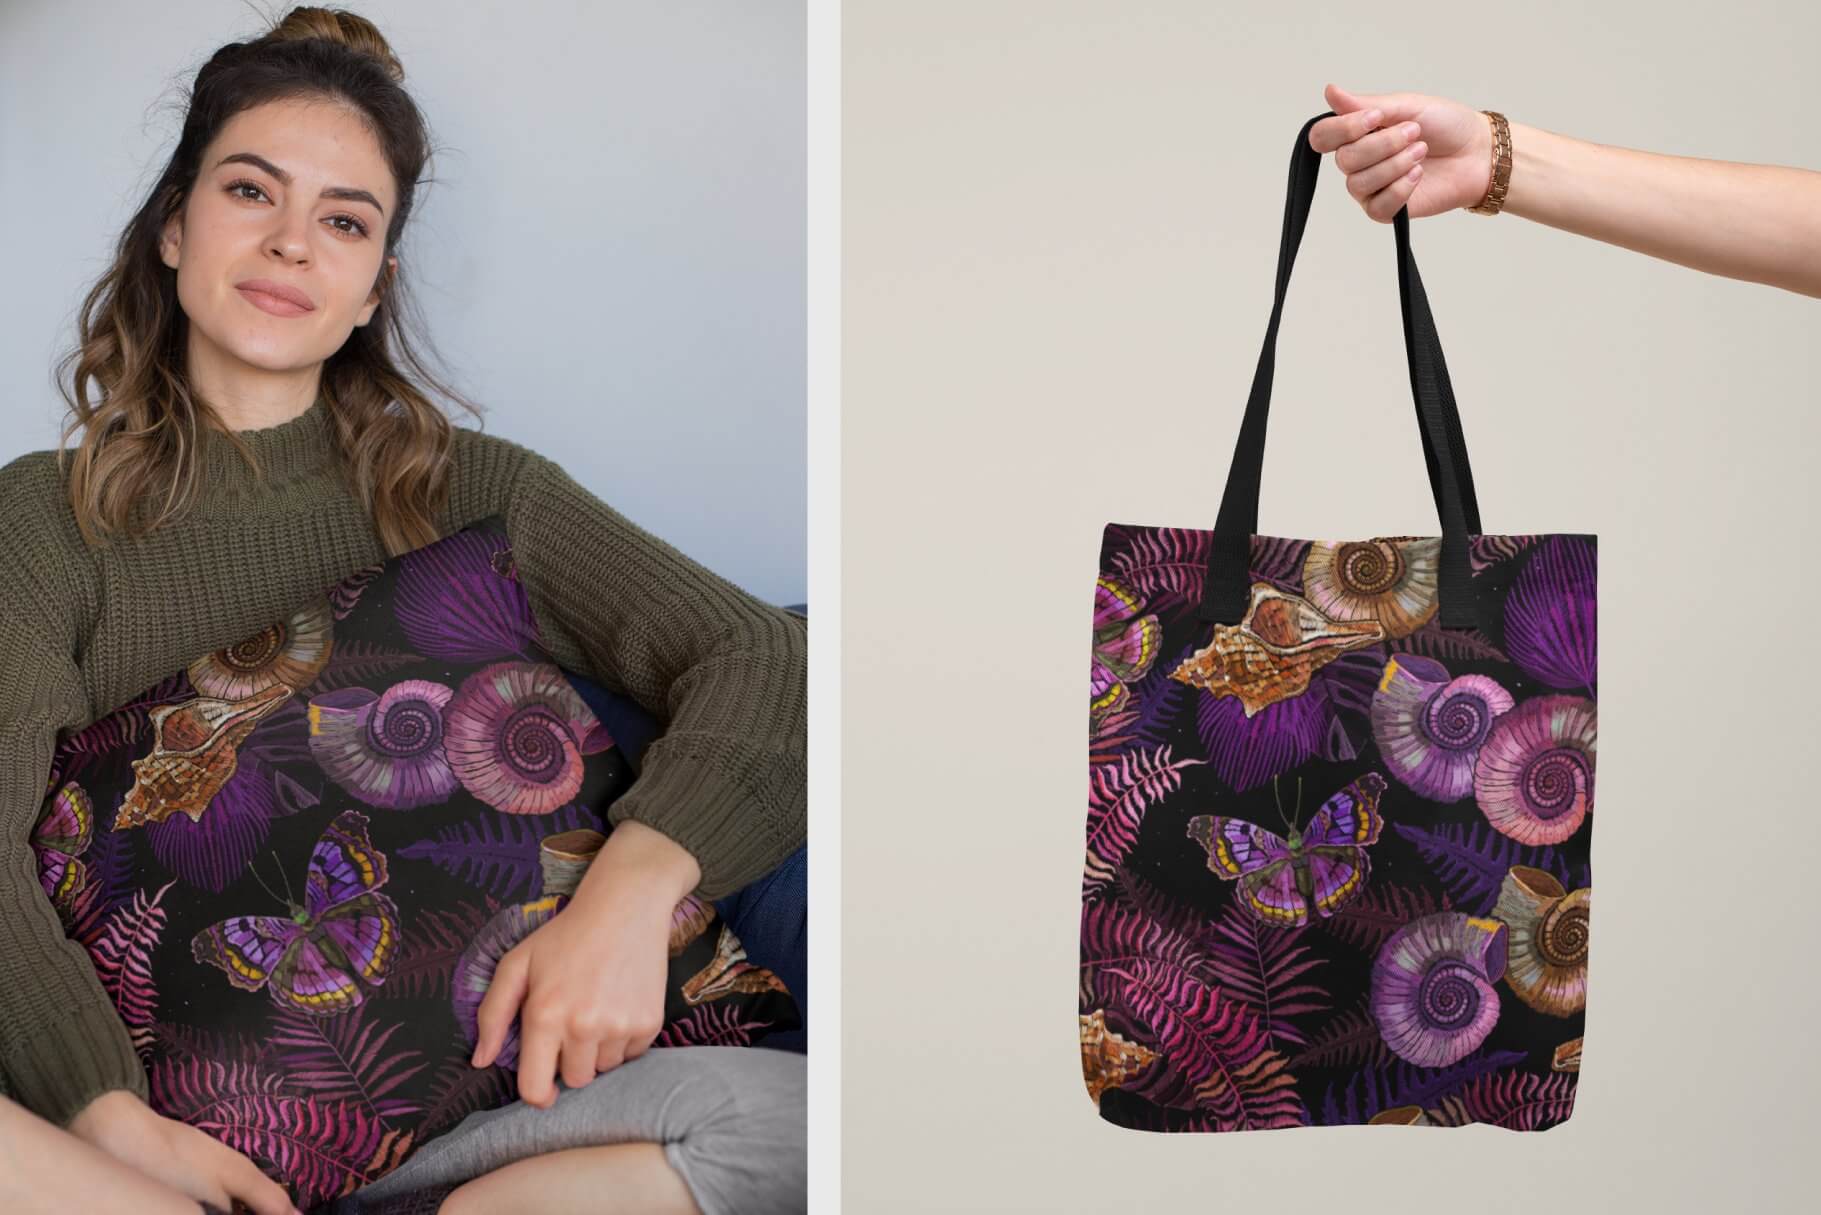 Dark bag and pillow with painted purple seashells, ferns and butterflies.